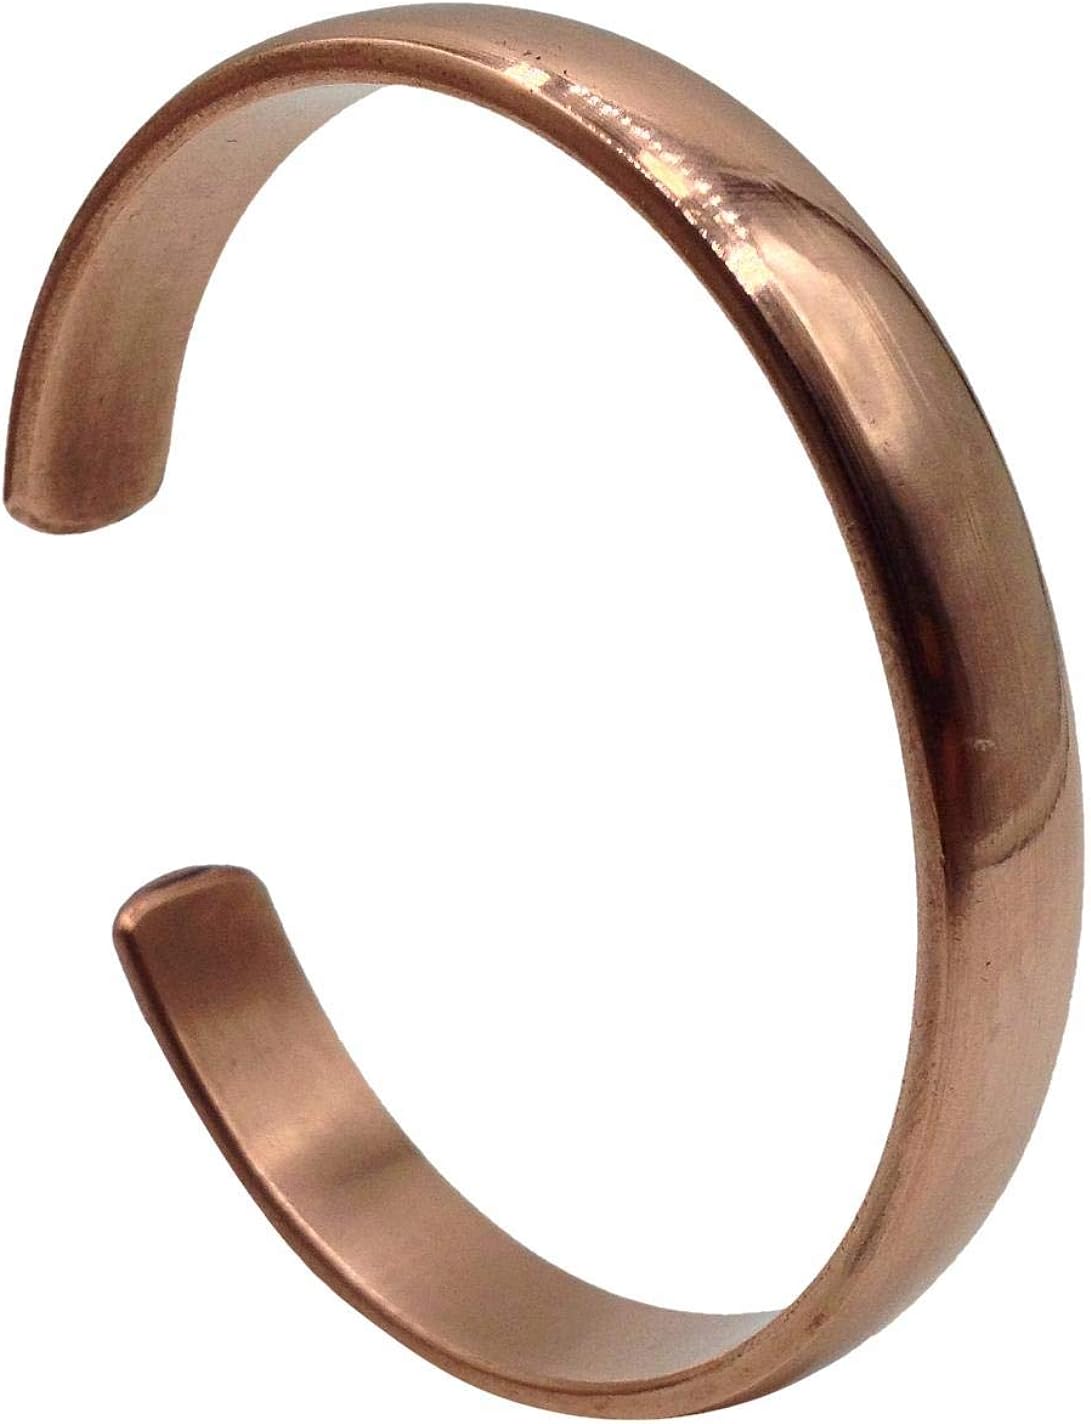 Healing Lama™ Hand Forged 100% Copper Bracelet. Made with Solid and High Gauge Pure Copper. Helps Reducing The Joint Pain and Stiffness, Joint Related Inflammation and Skin Allergies